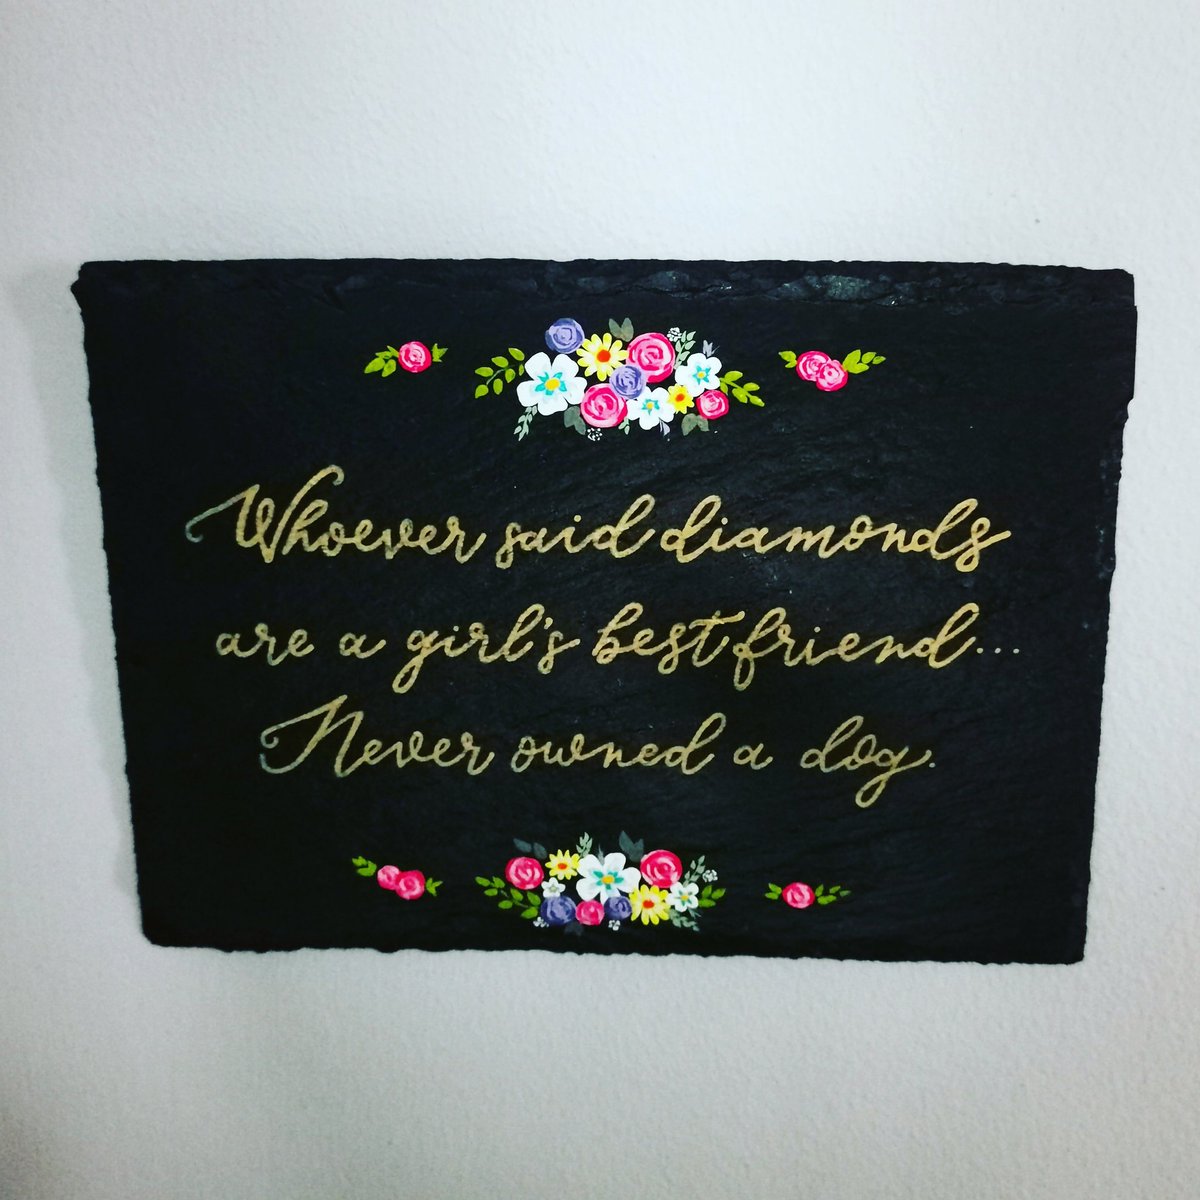 Dogs are a girl's best friend 🐶#quoteoftheday #dogs #dogsarethebest #handwritten #handpainted #homedecor #wallart #quote #handdecorated #homesweethome